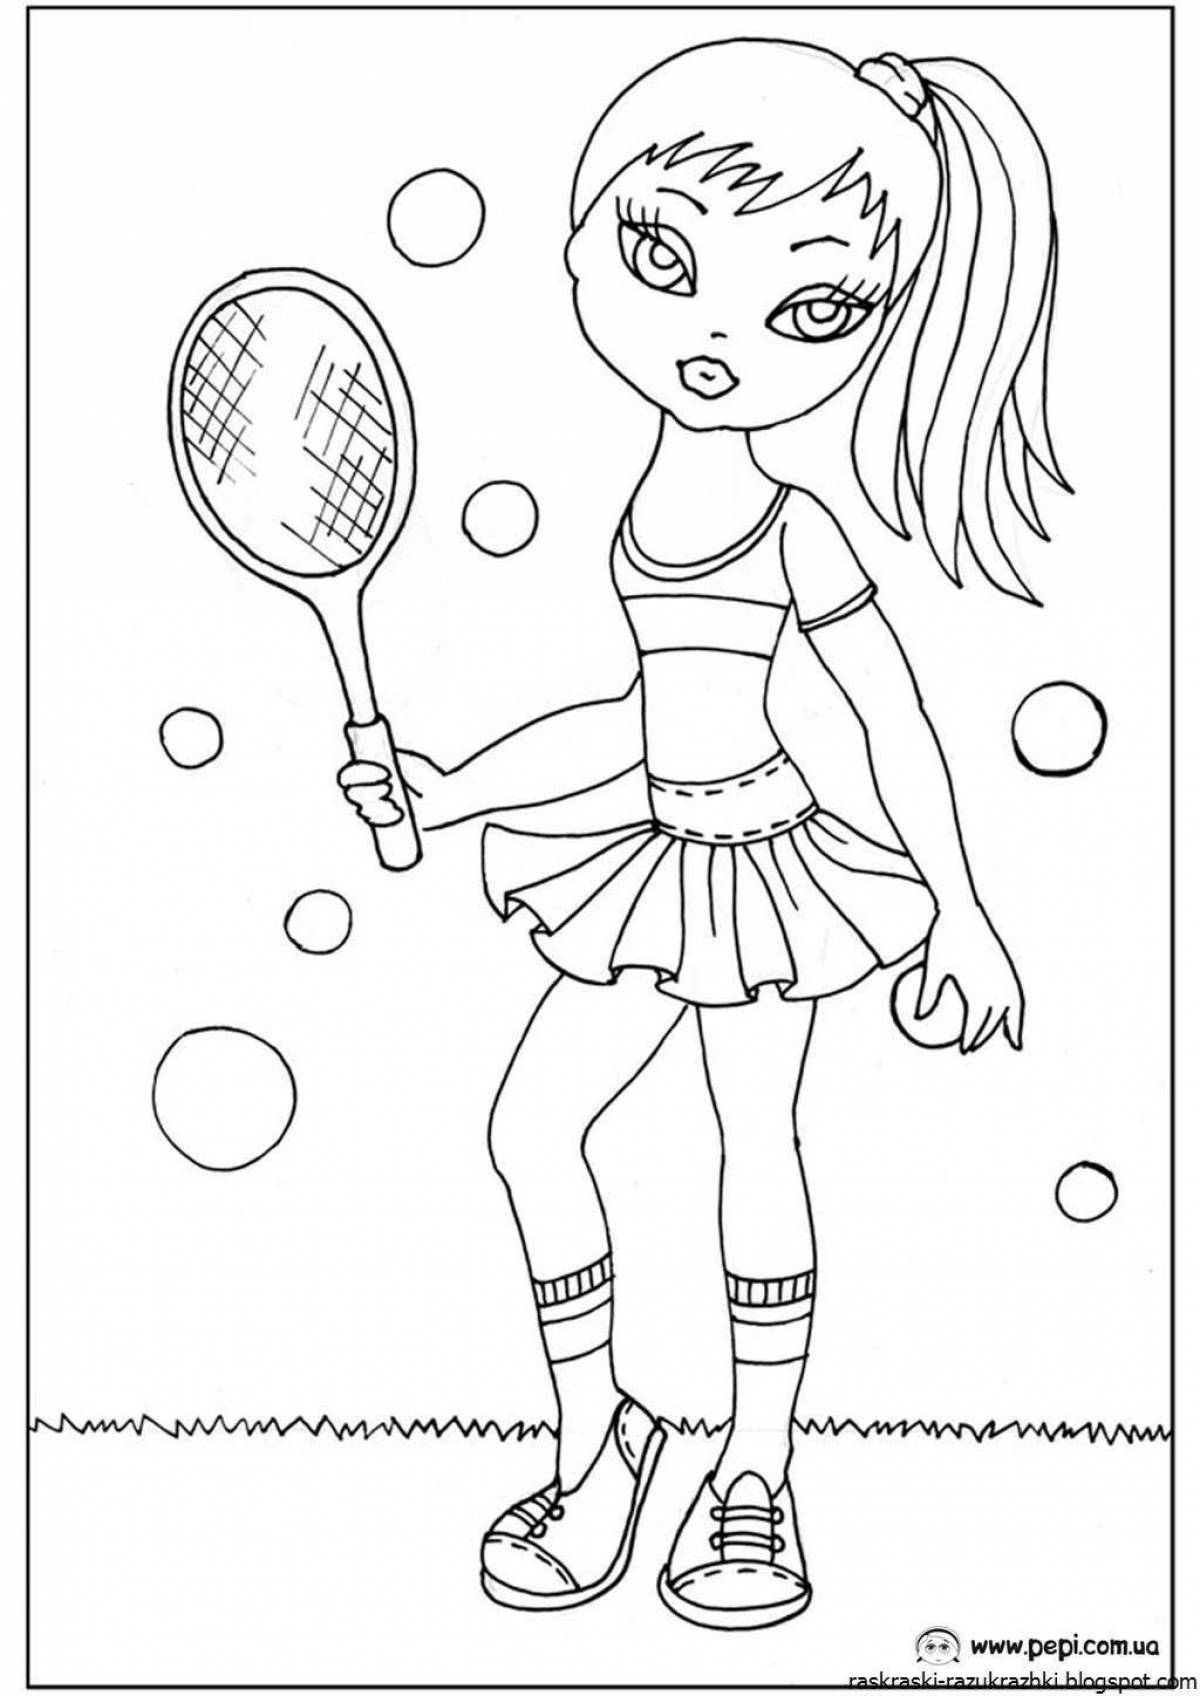 A fun sports coloring book for kids 6-7 years old